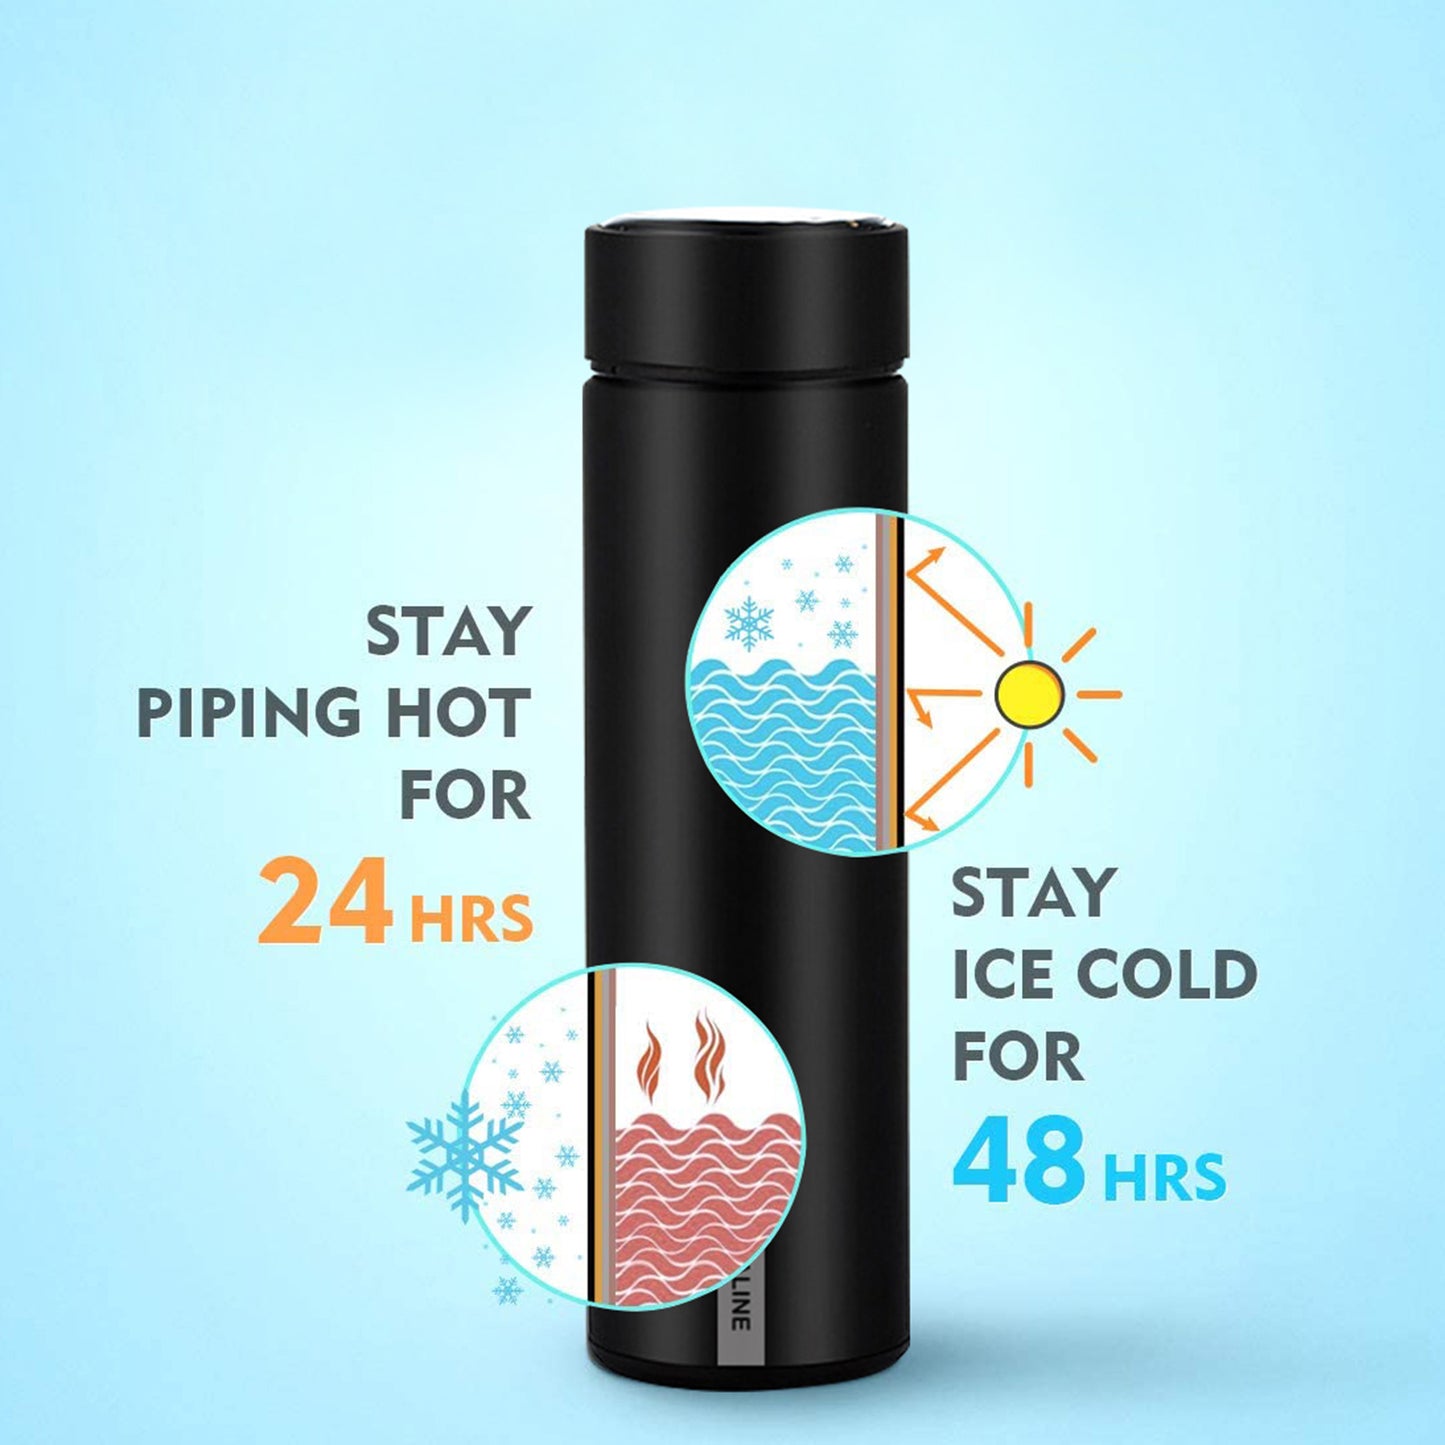 DIJA Alkaline Insulated Water Bottle Includes Filter Improve PH 9+, Keep Cold up to 24 hours, 500ml Stainless Steel Water Bottle